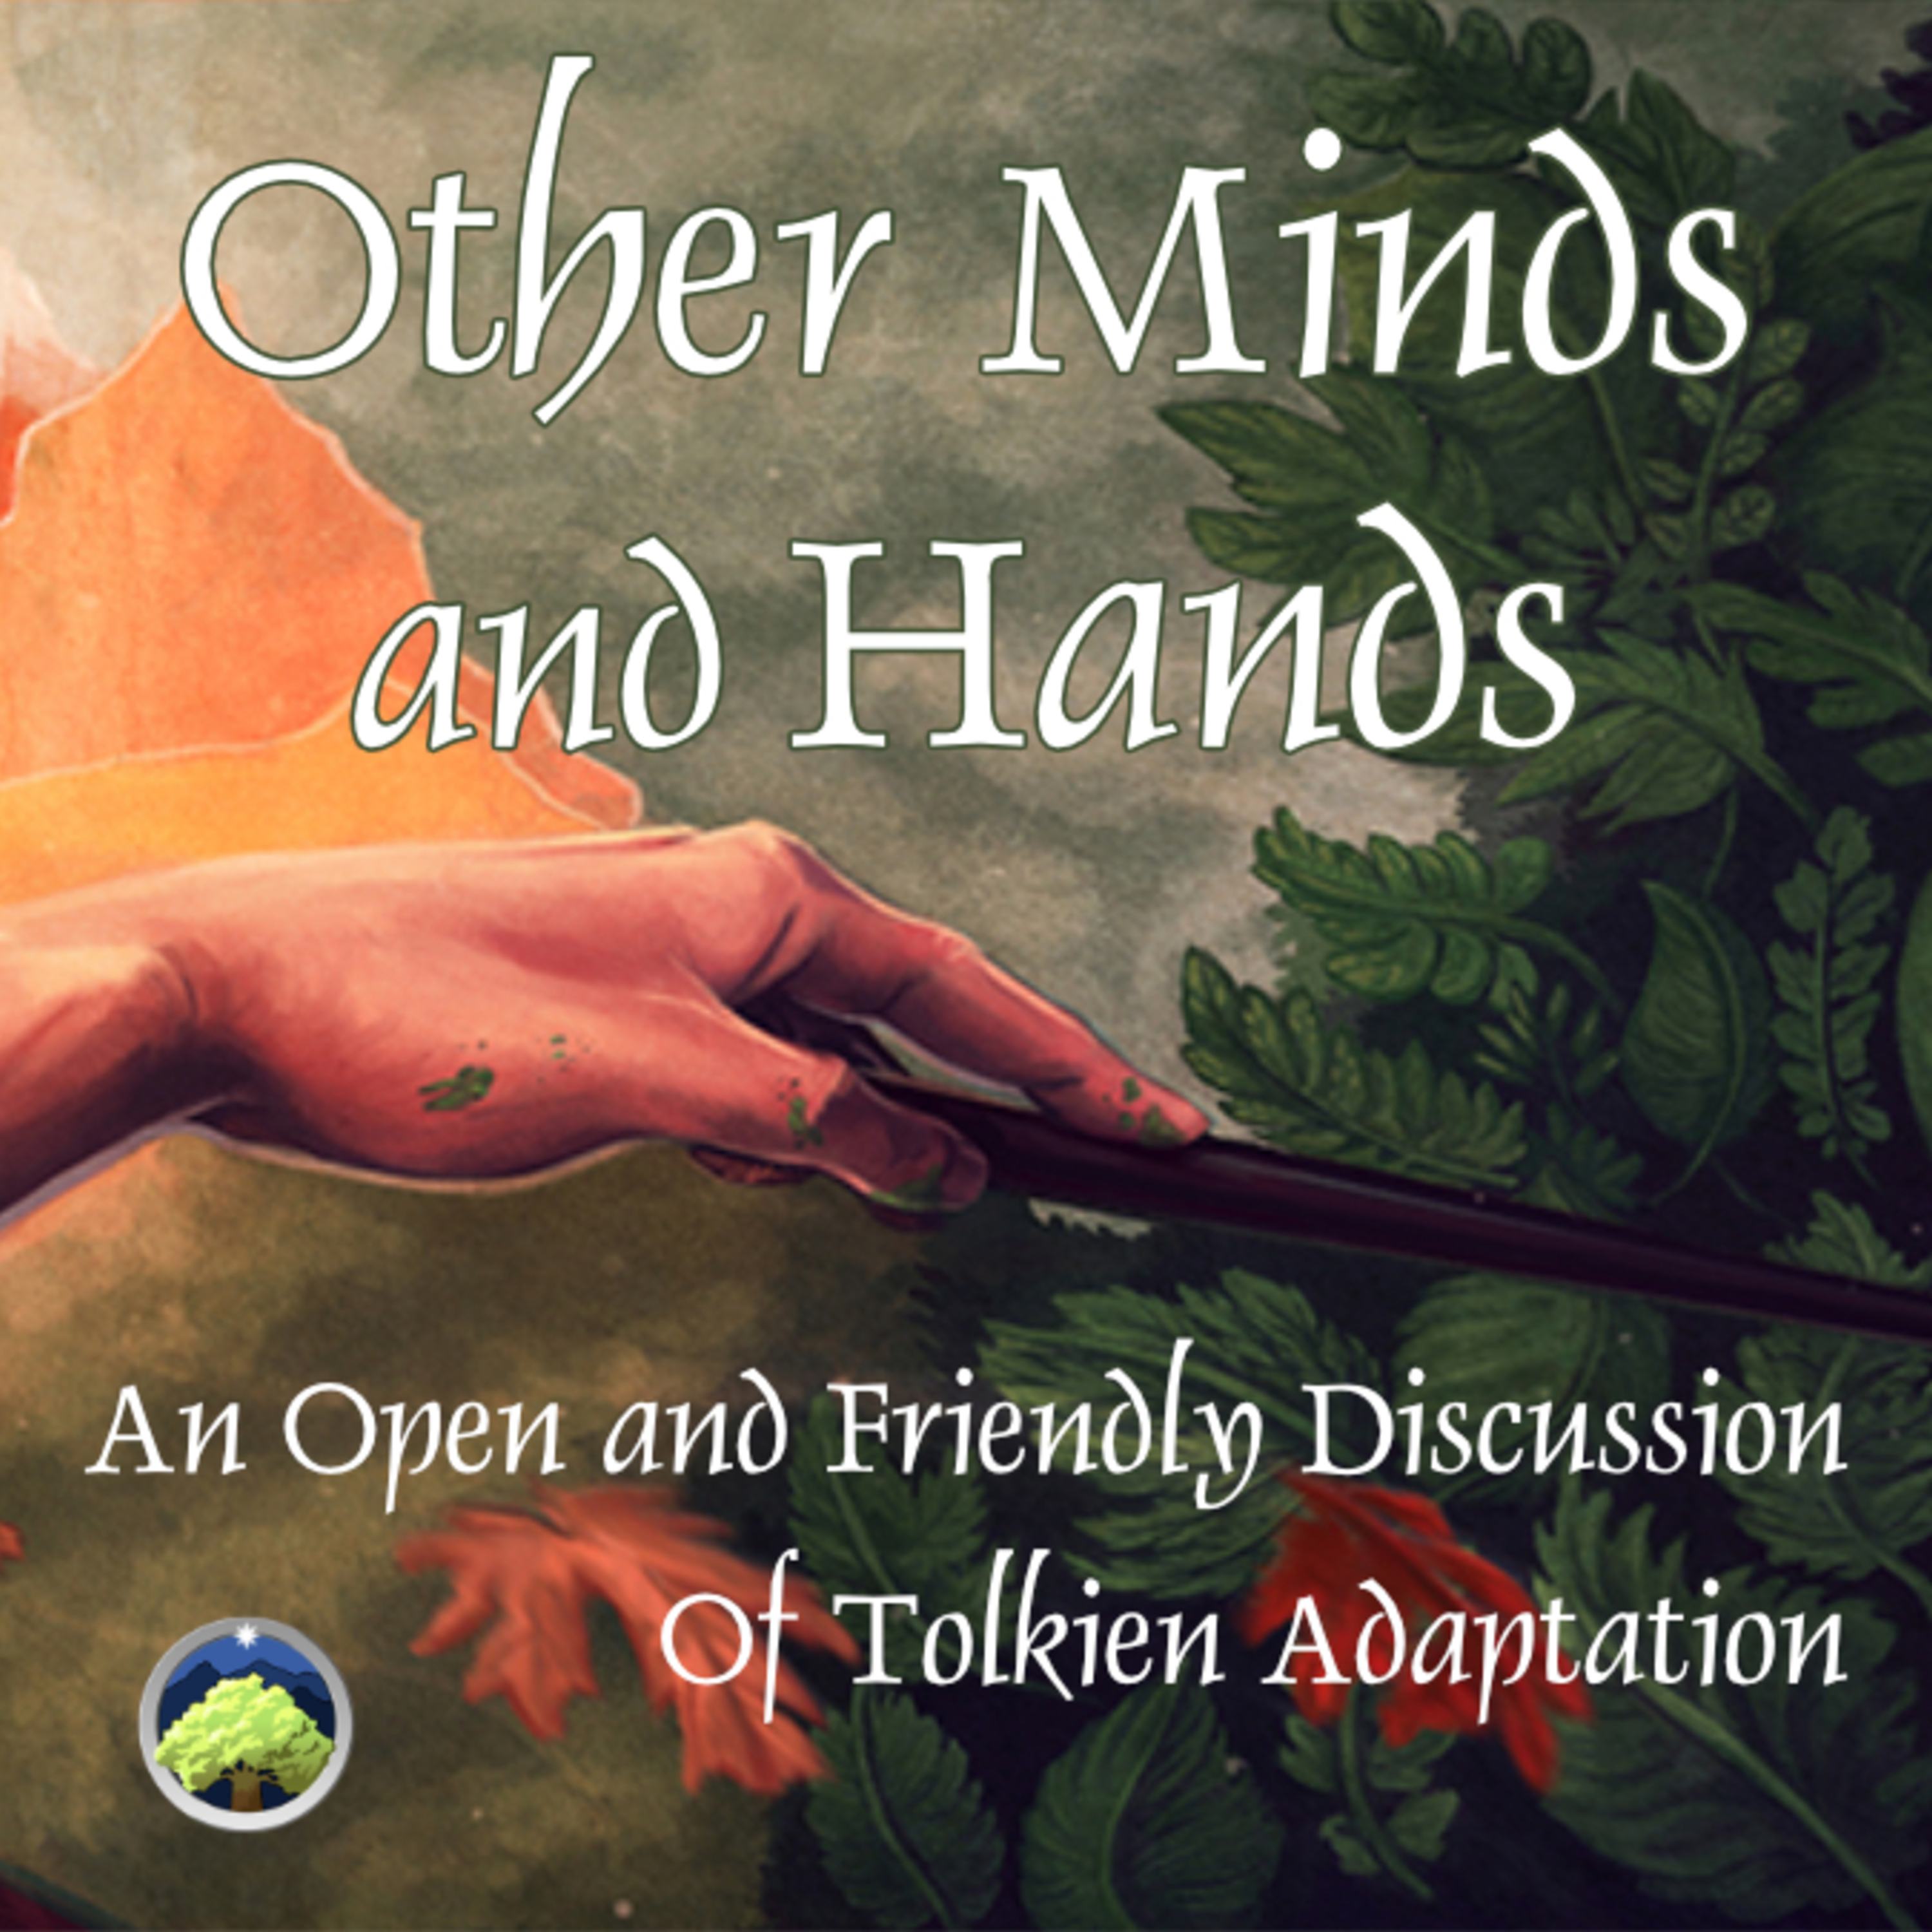 564: Other Minds and Hands, Episode 66